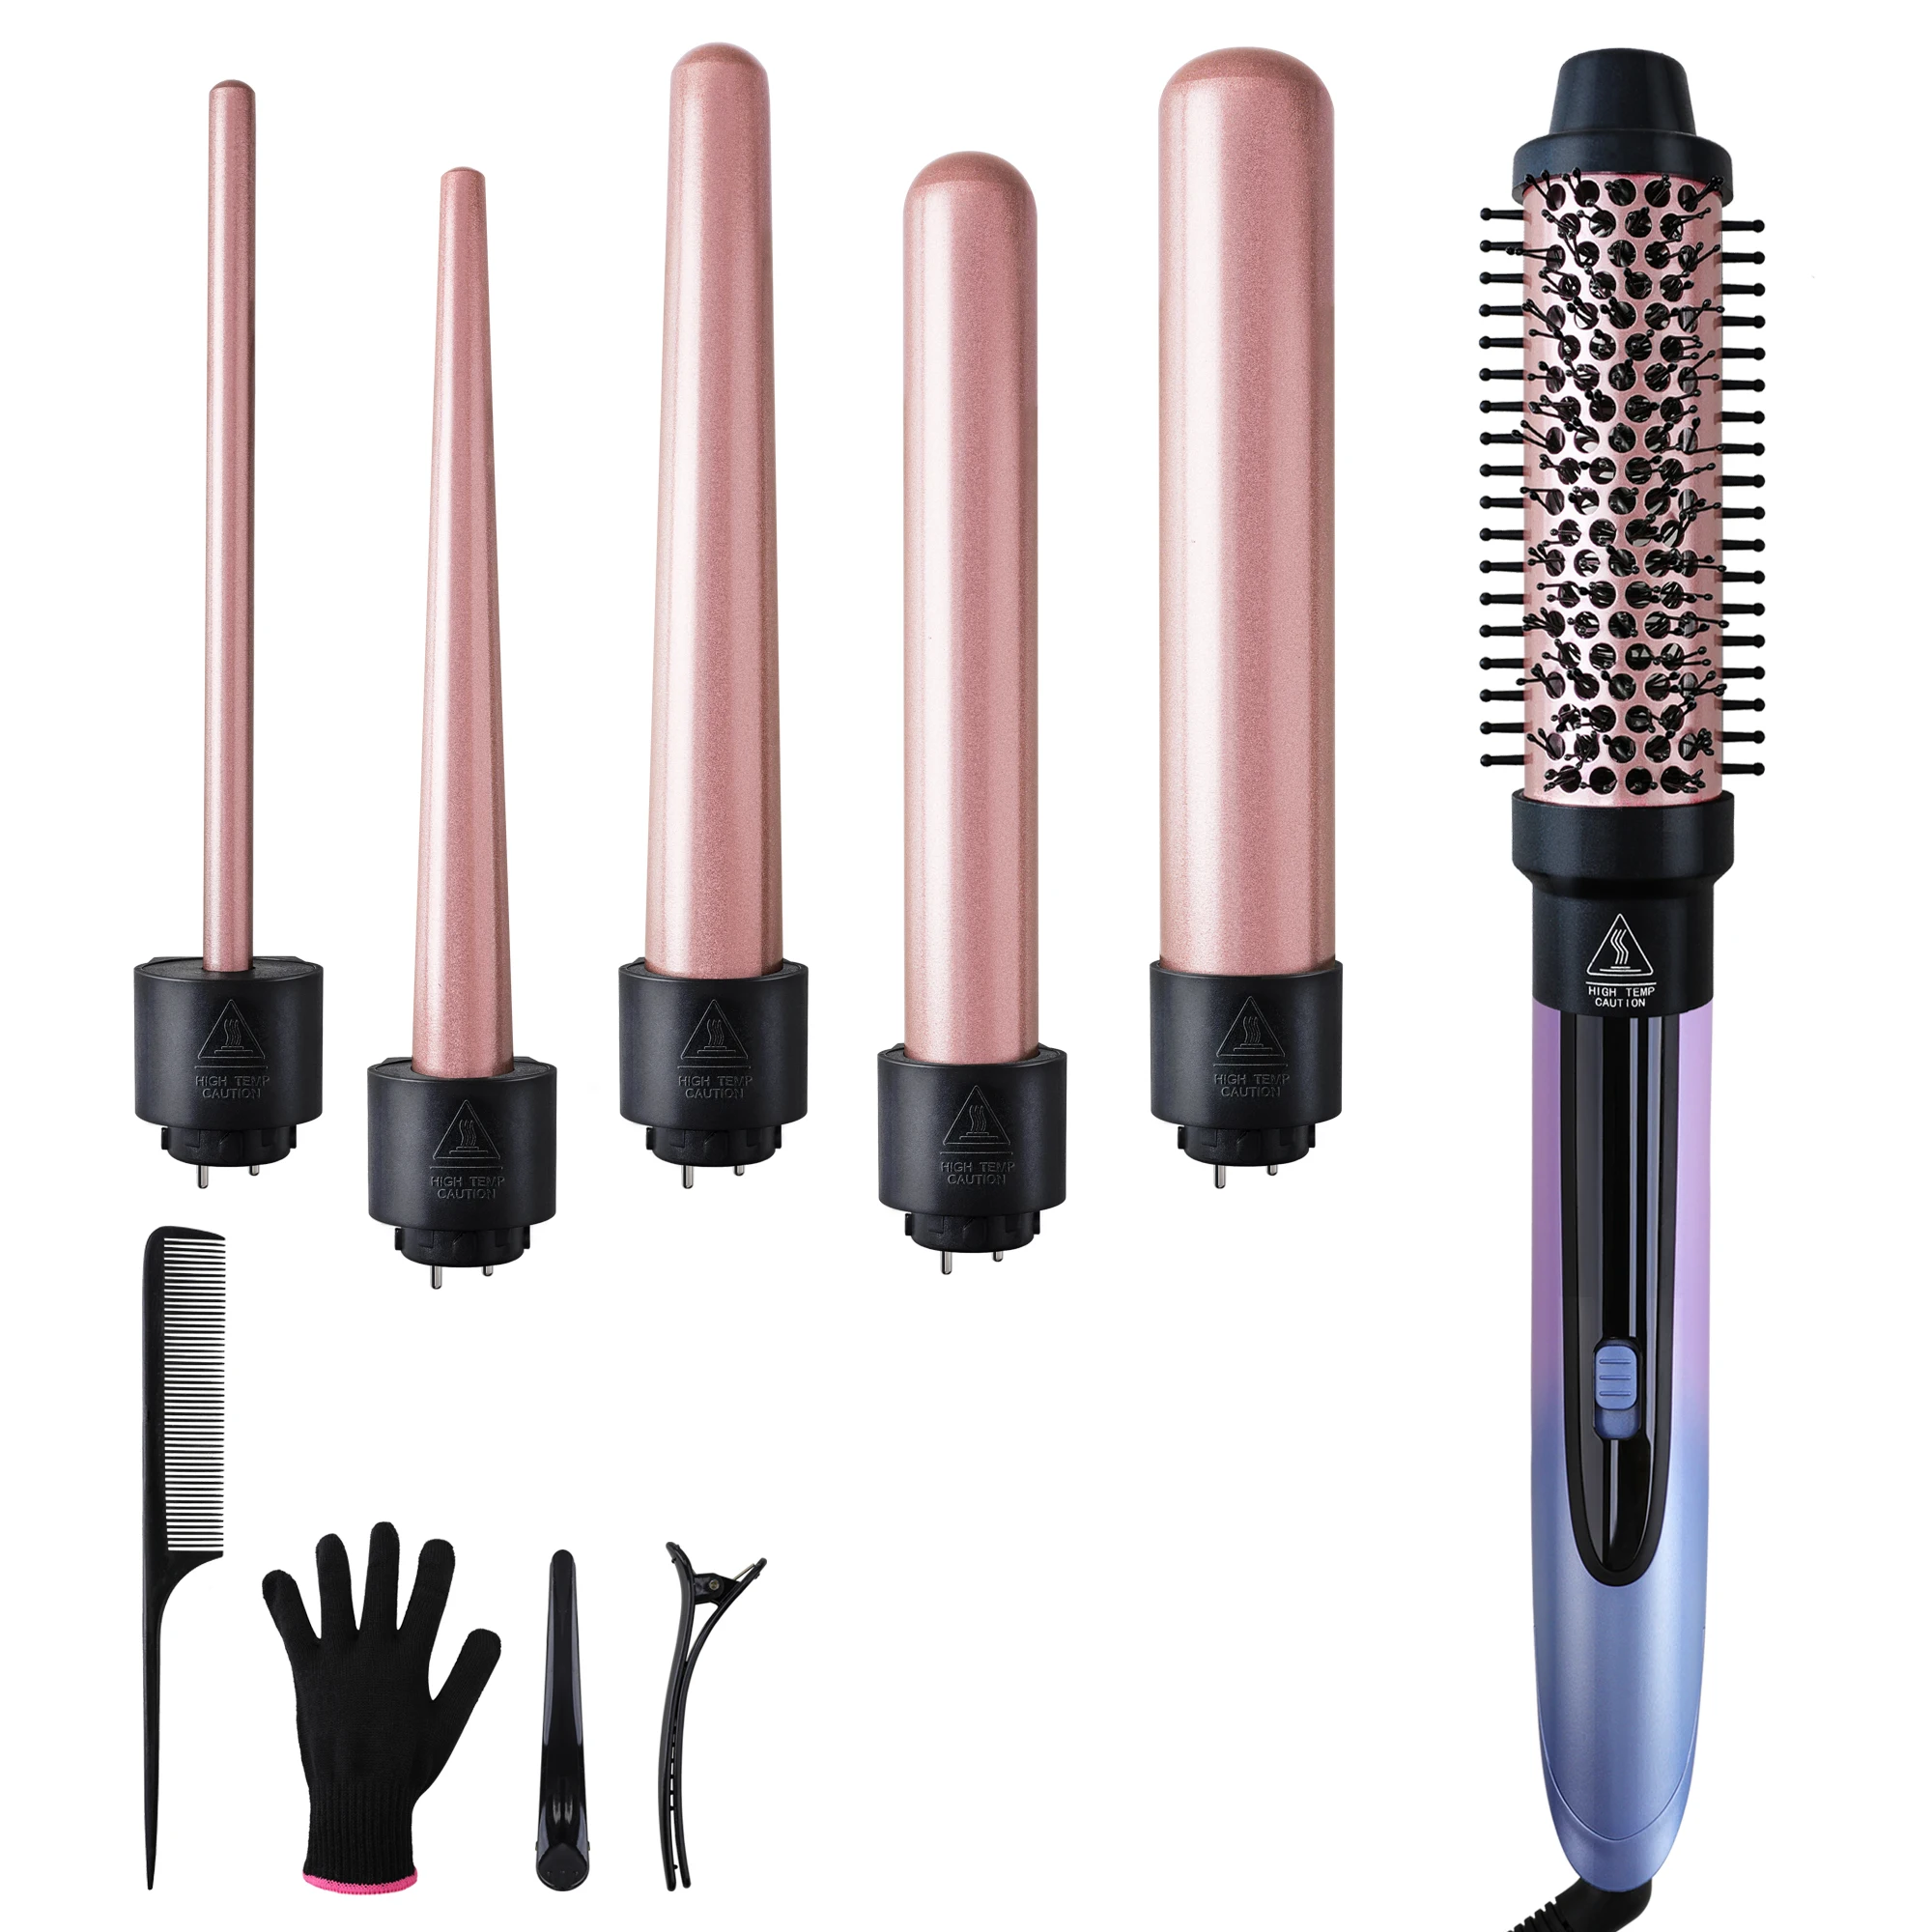 

6 in 1 Curling Iron Factory Hair Curling Wand With Interchangeable 6 Barrels Hair Curler Crimper Waver For Women Ebay